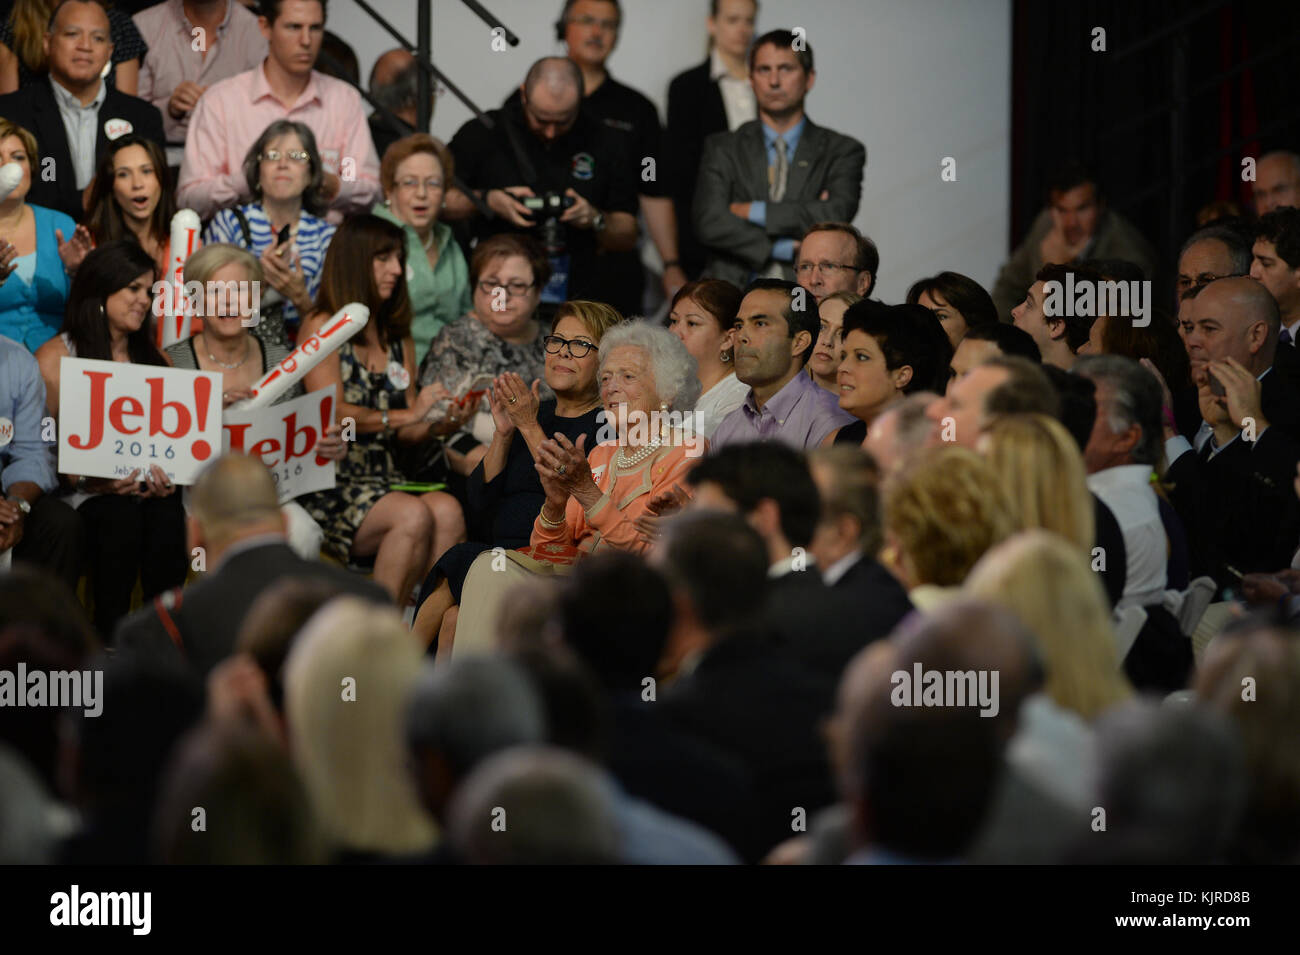 MIAMI, FL - JUNE 15: Former Florida Governor Jeb Bush on stage to announce his candidacy for the 2016 Republican presidential nomination at Miami Dade College - Kendall Campus Theodore Gibson Health Center (Gymnasium) June 15, 2015 in Miami, Florida. John Ellis 'Jeb' Bush will attempt to follow his brother and father into the nation's highest office when he officially announces today that he'll run for president of the United States   People:  Barbara Bush, George P. Bush Stock Photo